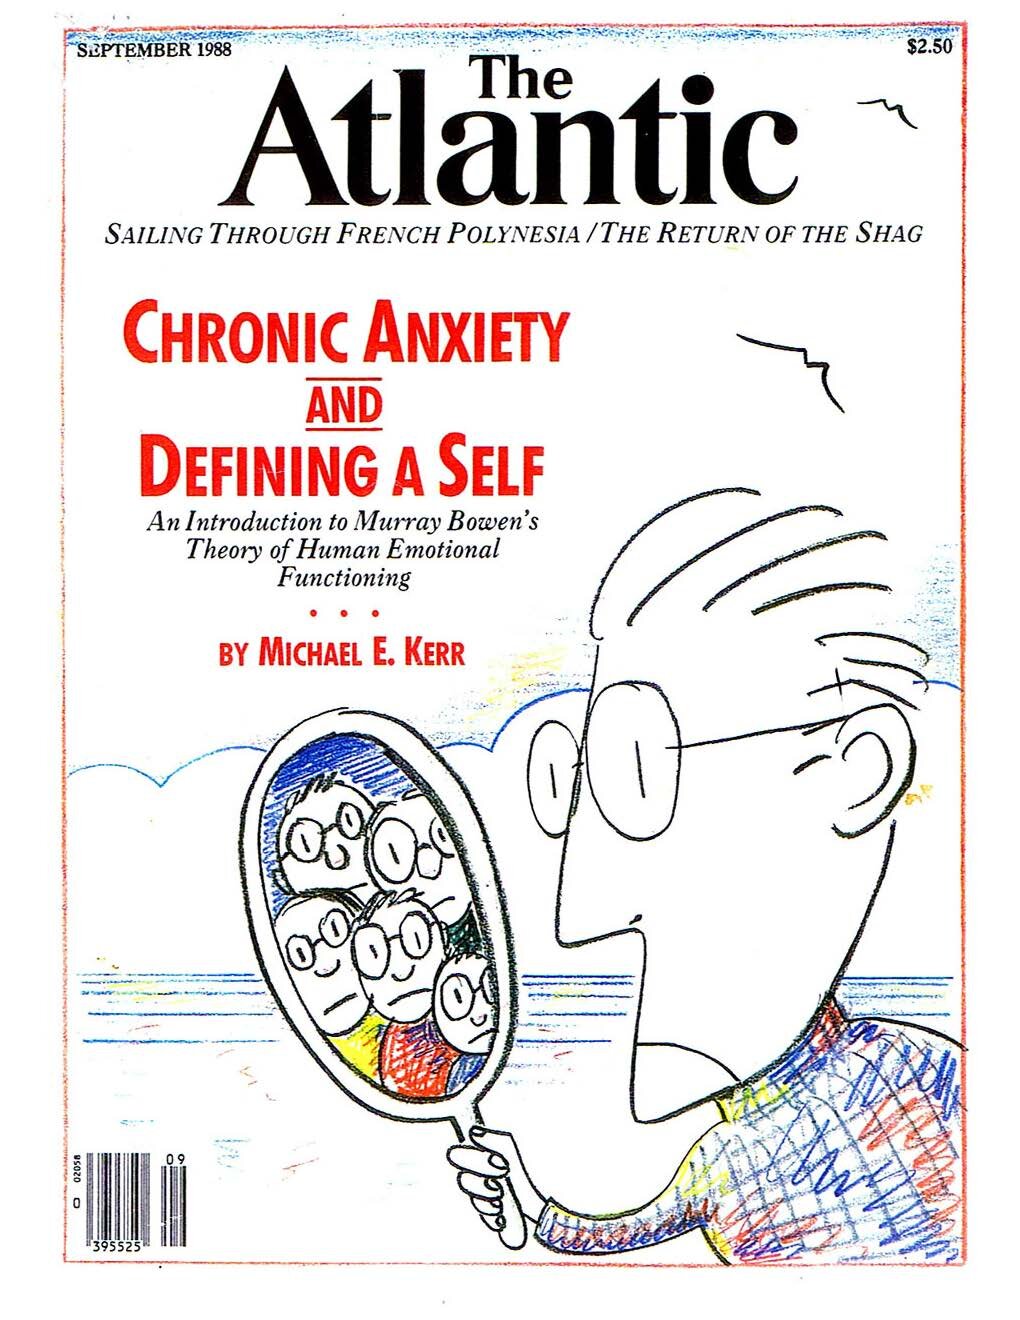 Chronic Anxiety and Defining a Self